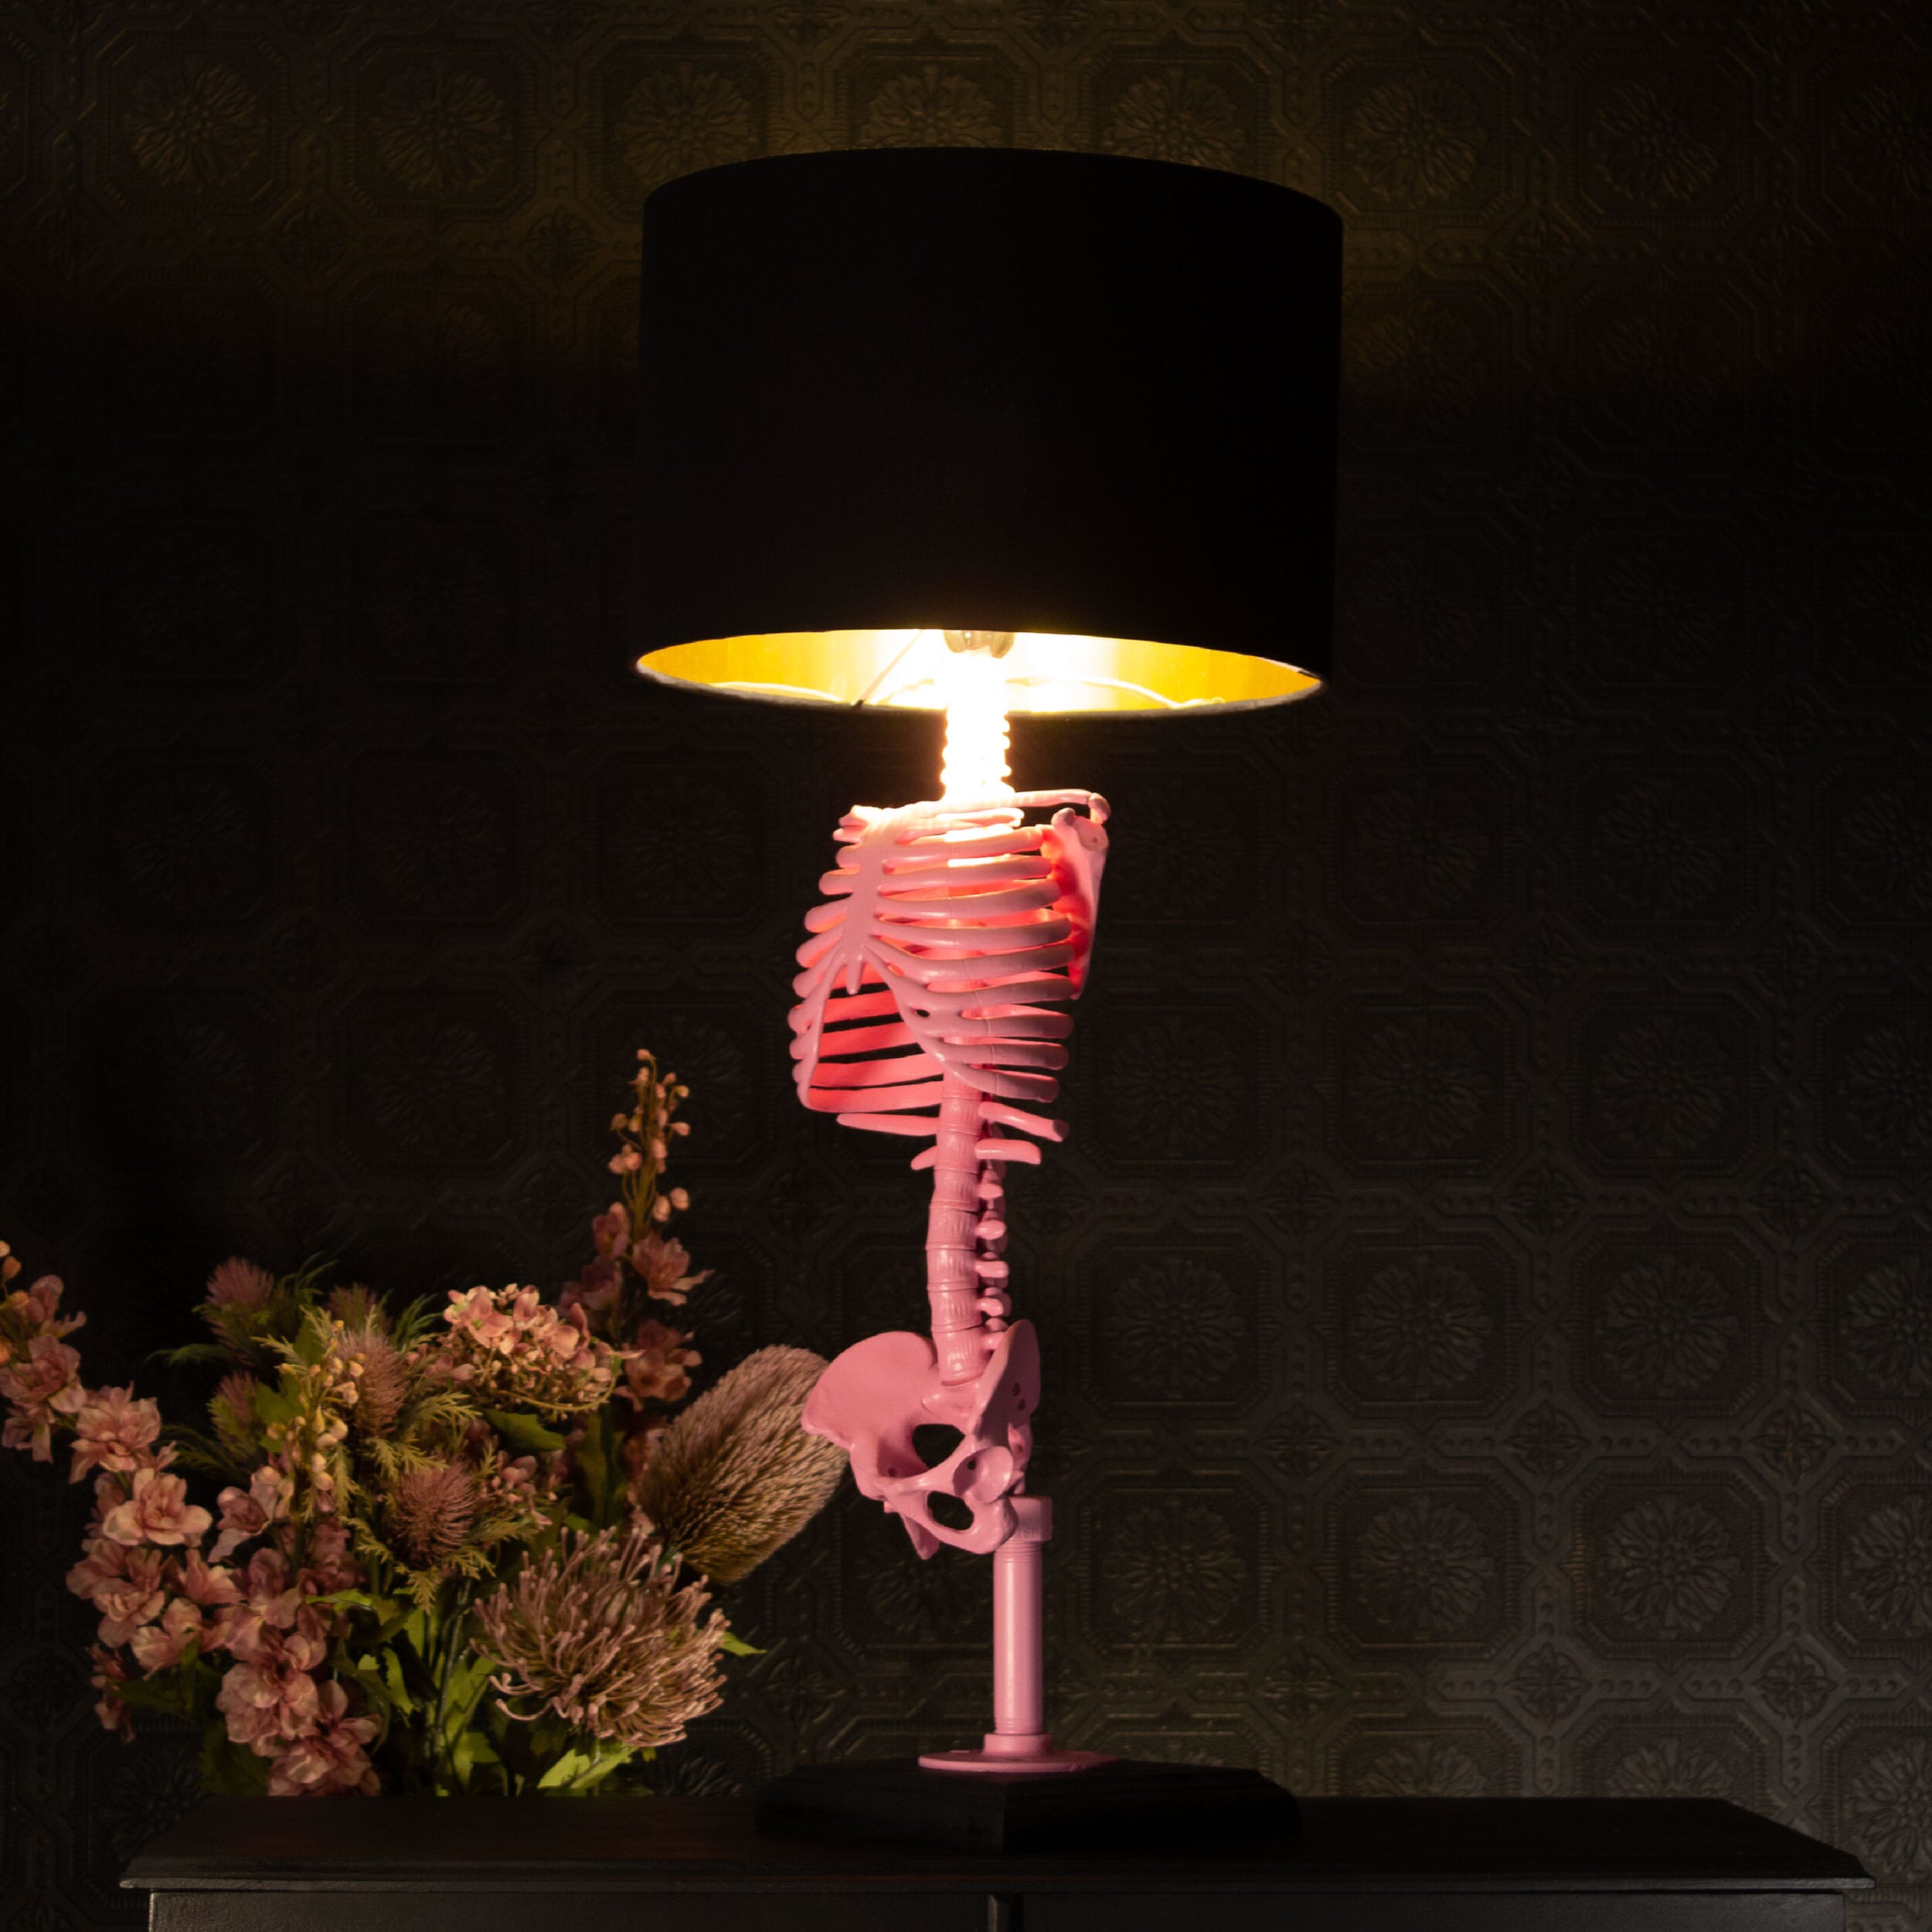 The Skeleton Table Lamp in Pink by The Blackened Teeth Gothic Home Decor